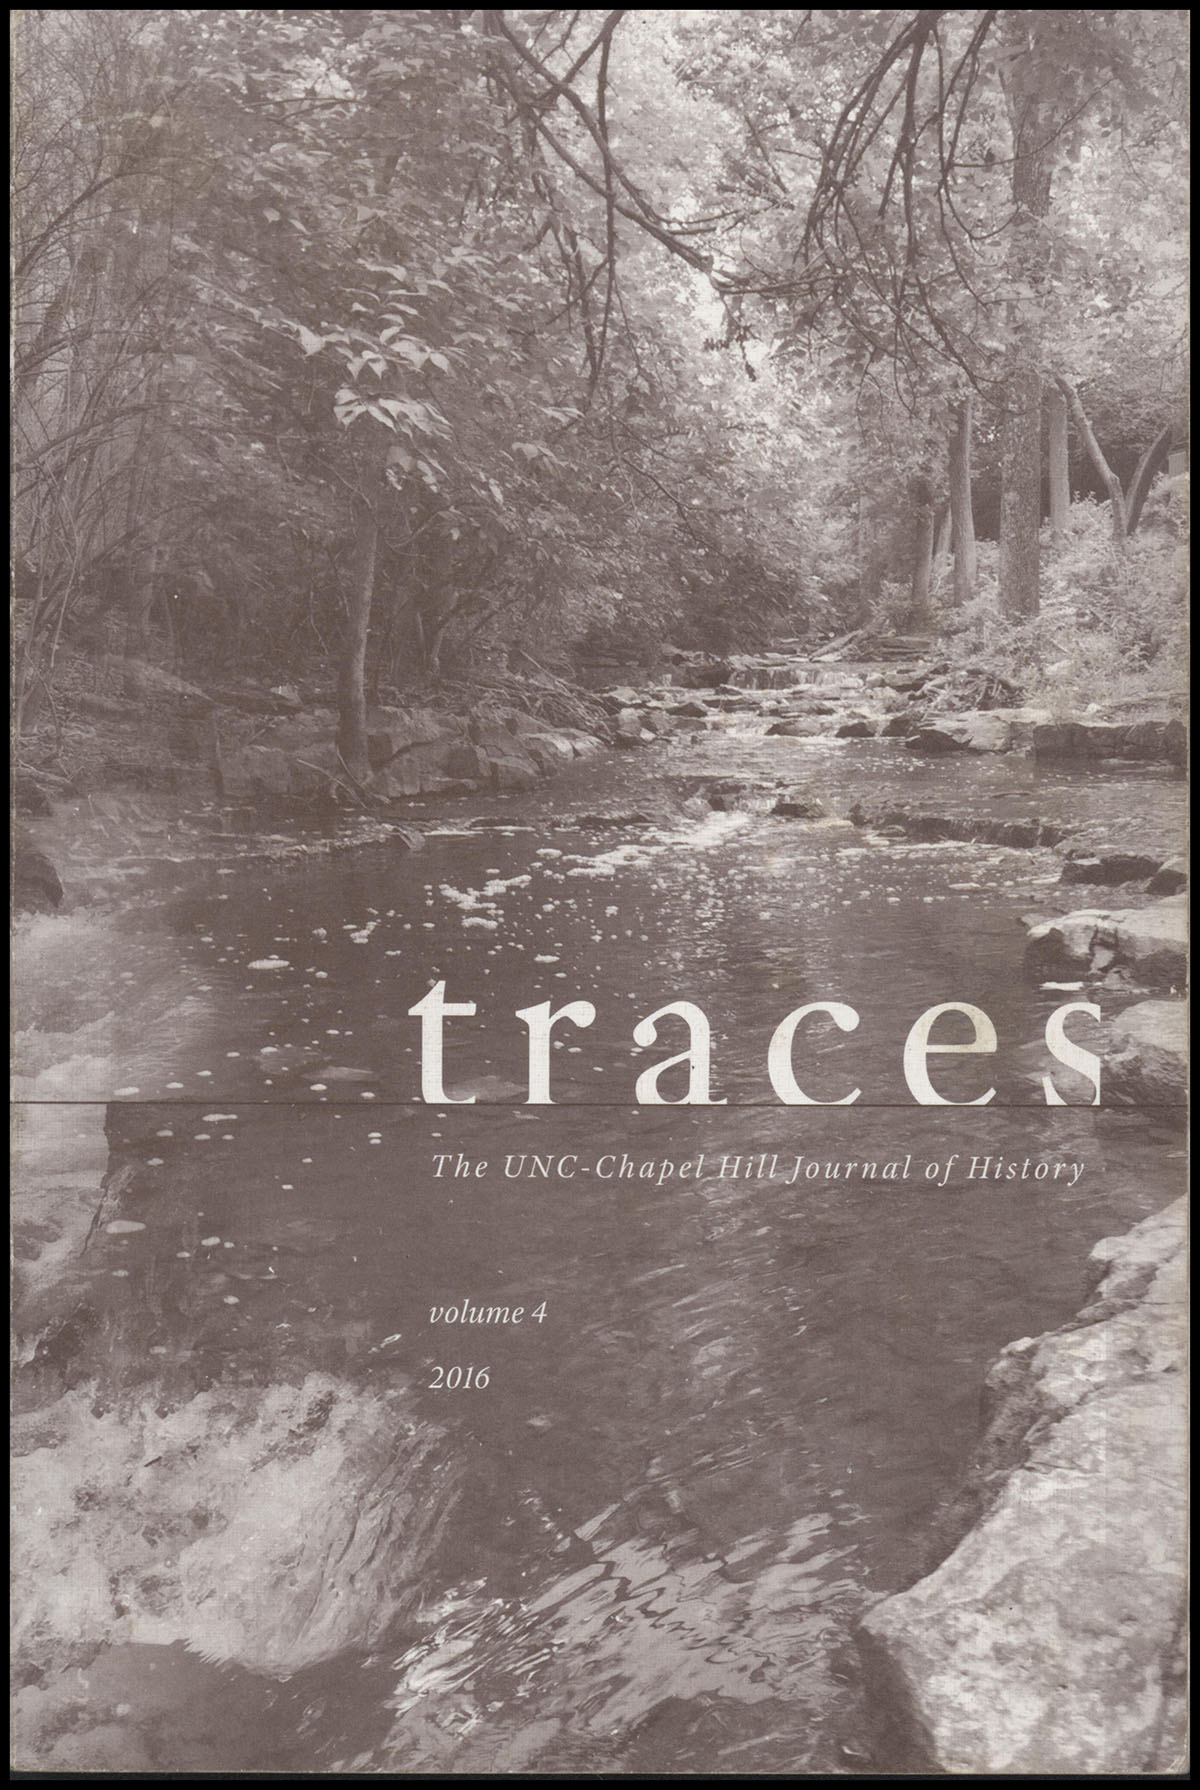 Chase, Elizabeth (editor) - Traces: The Unc-Chapel Hill Journal of History (Volume 4, 2016)